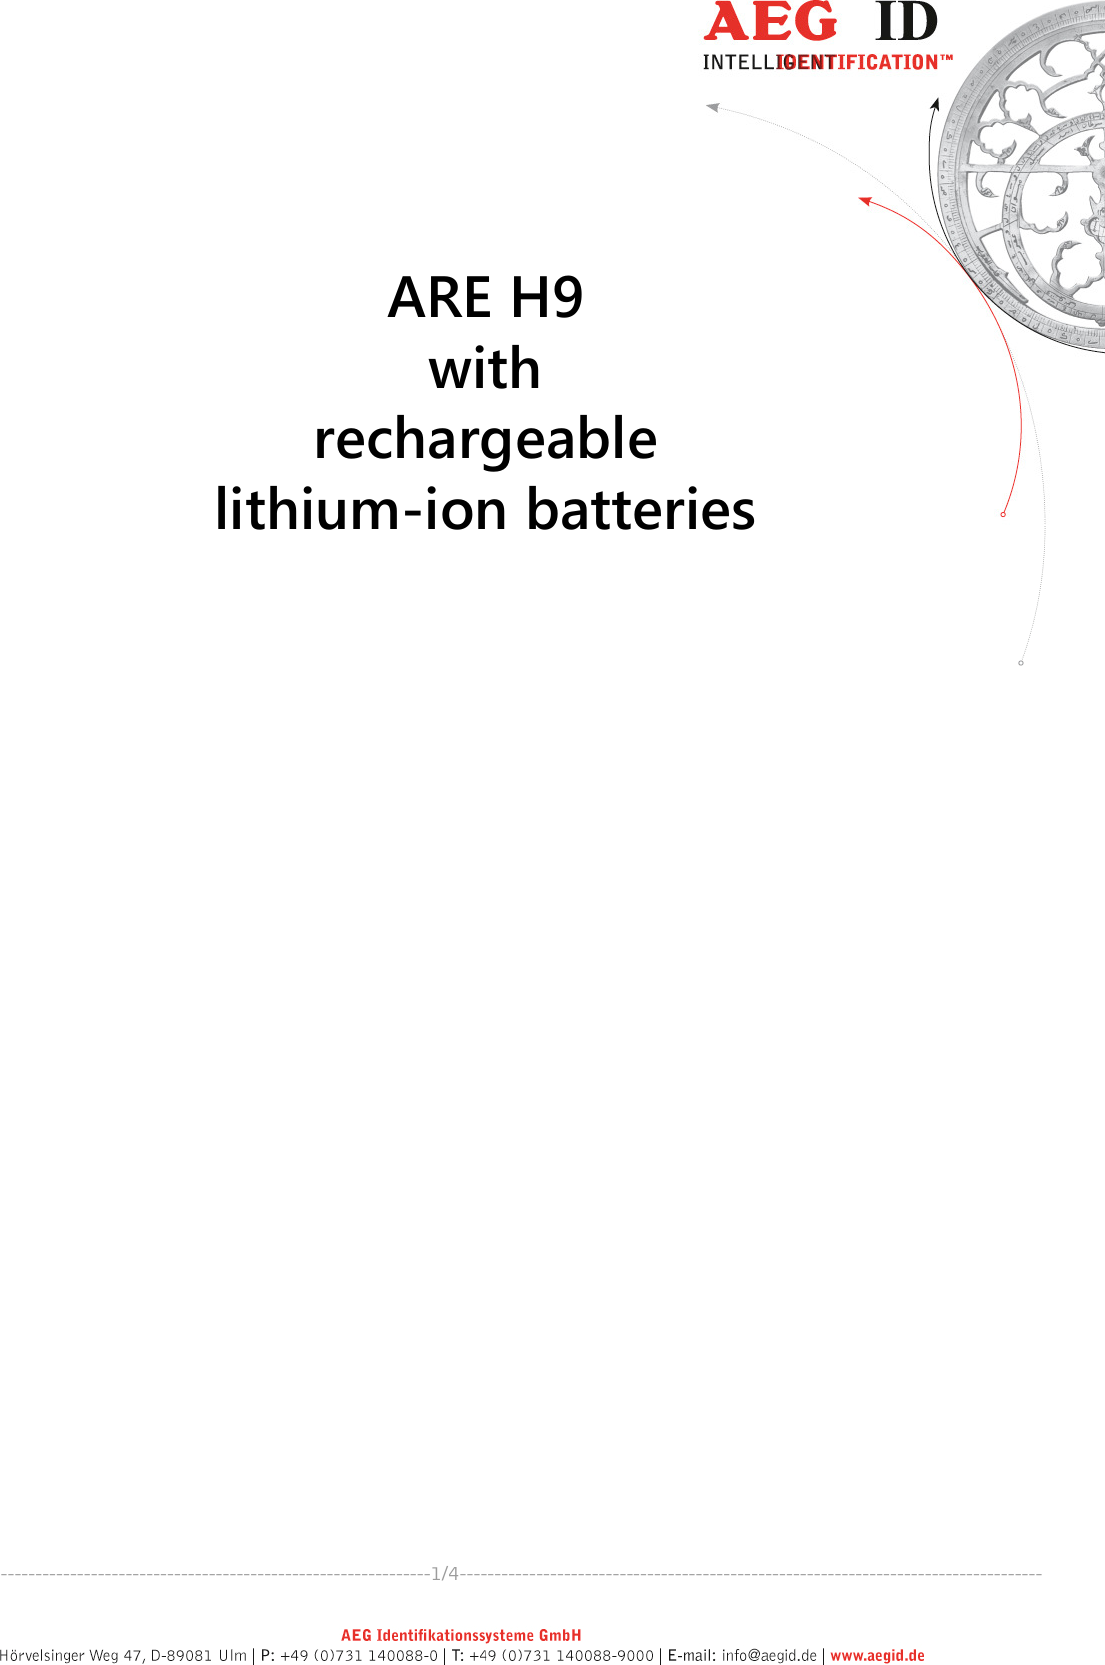           --------------------------------------------------------------------------1/4------------------------------------------------------------------------------------     ARE H9 with rechargeable  lithium-ion batteries    